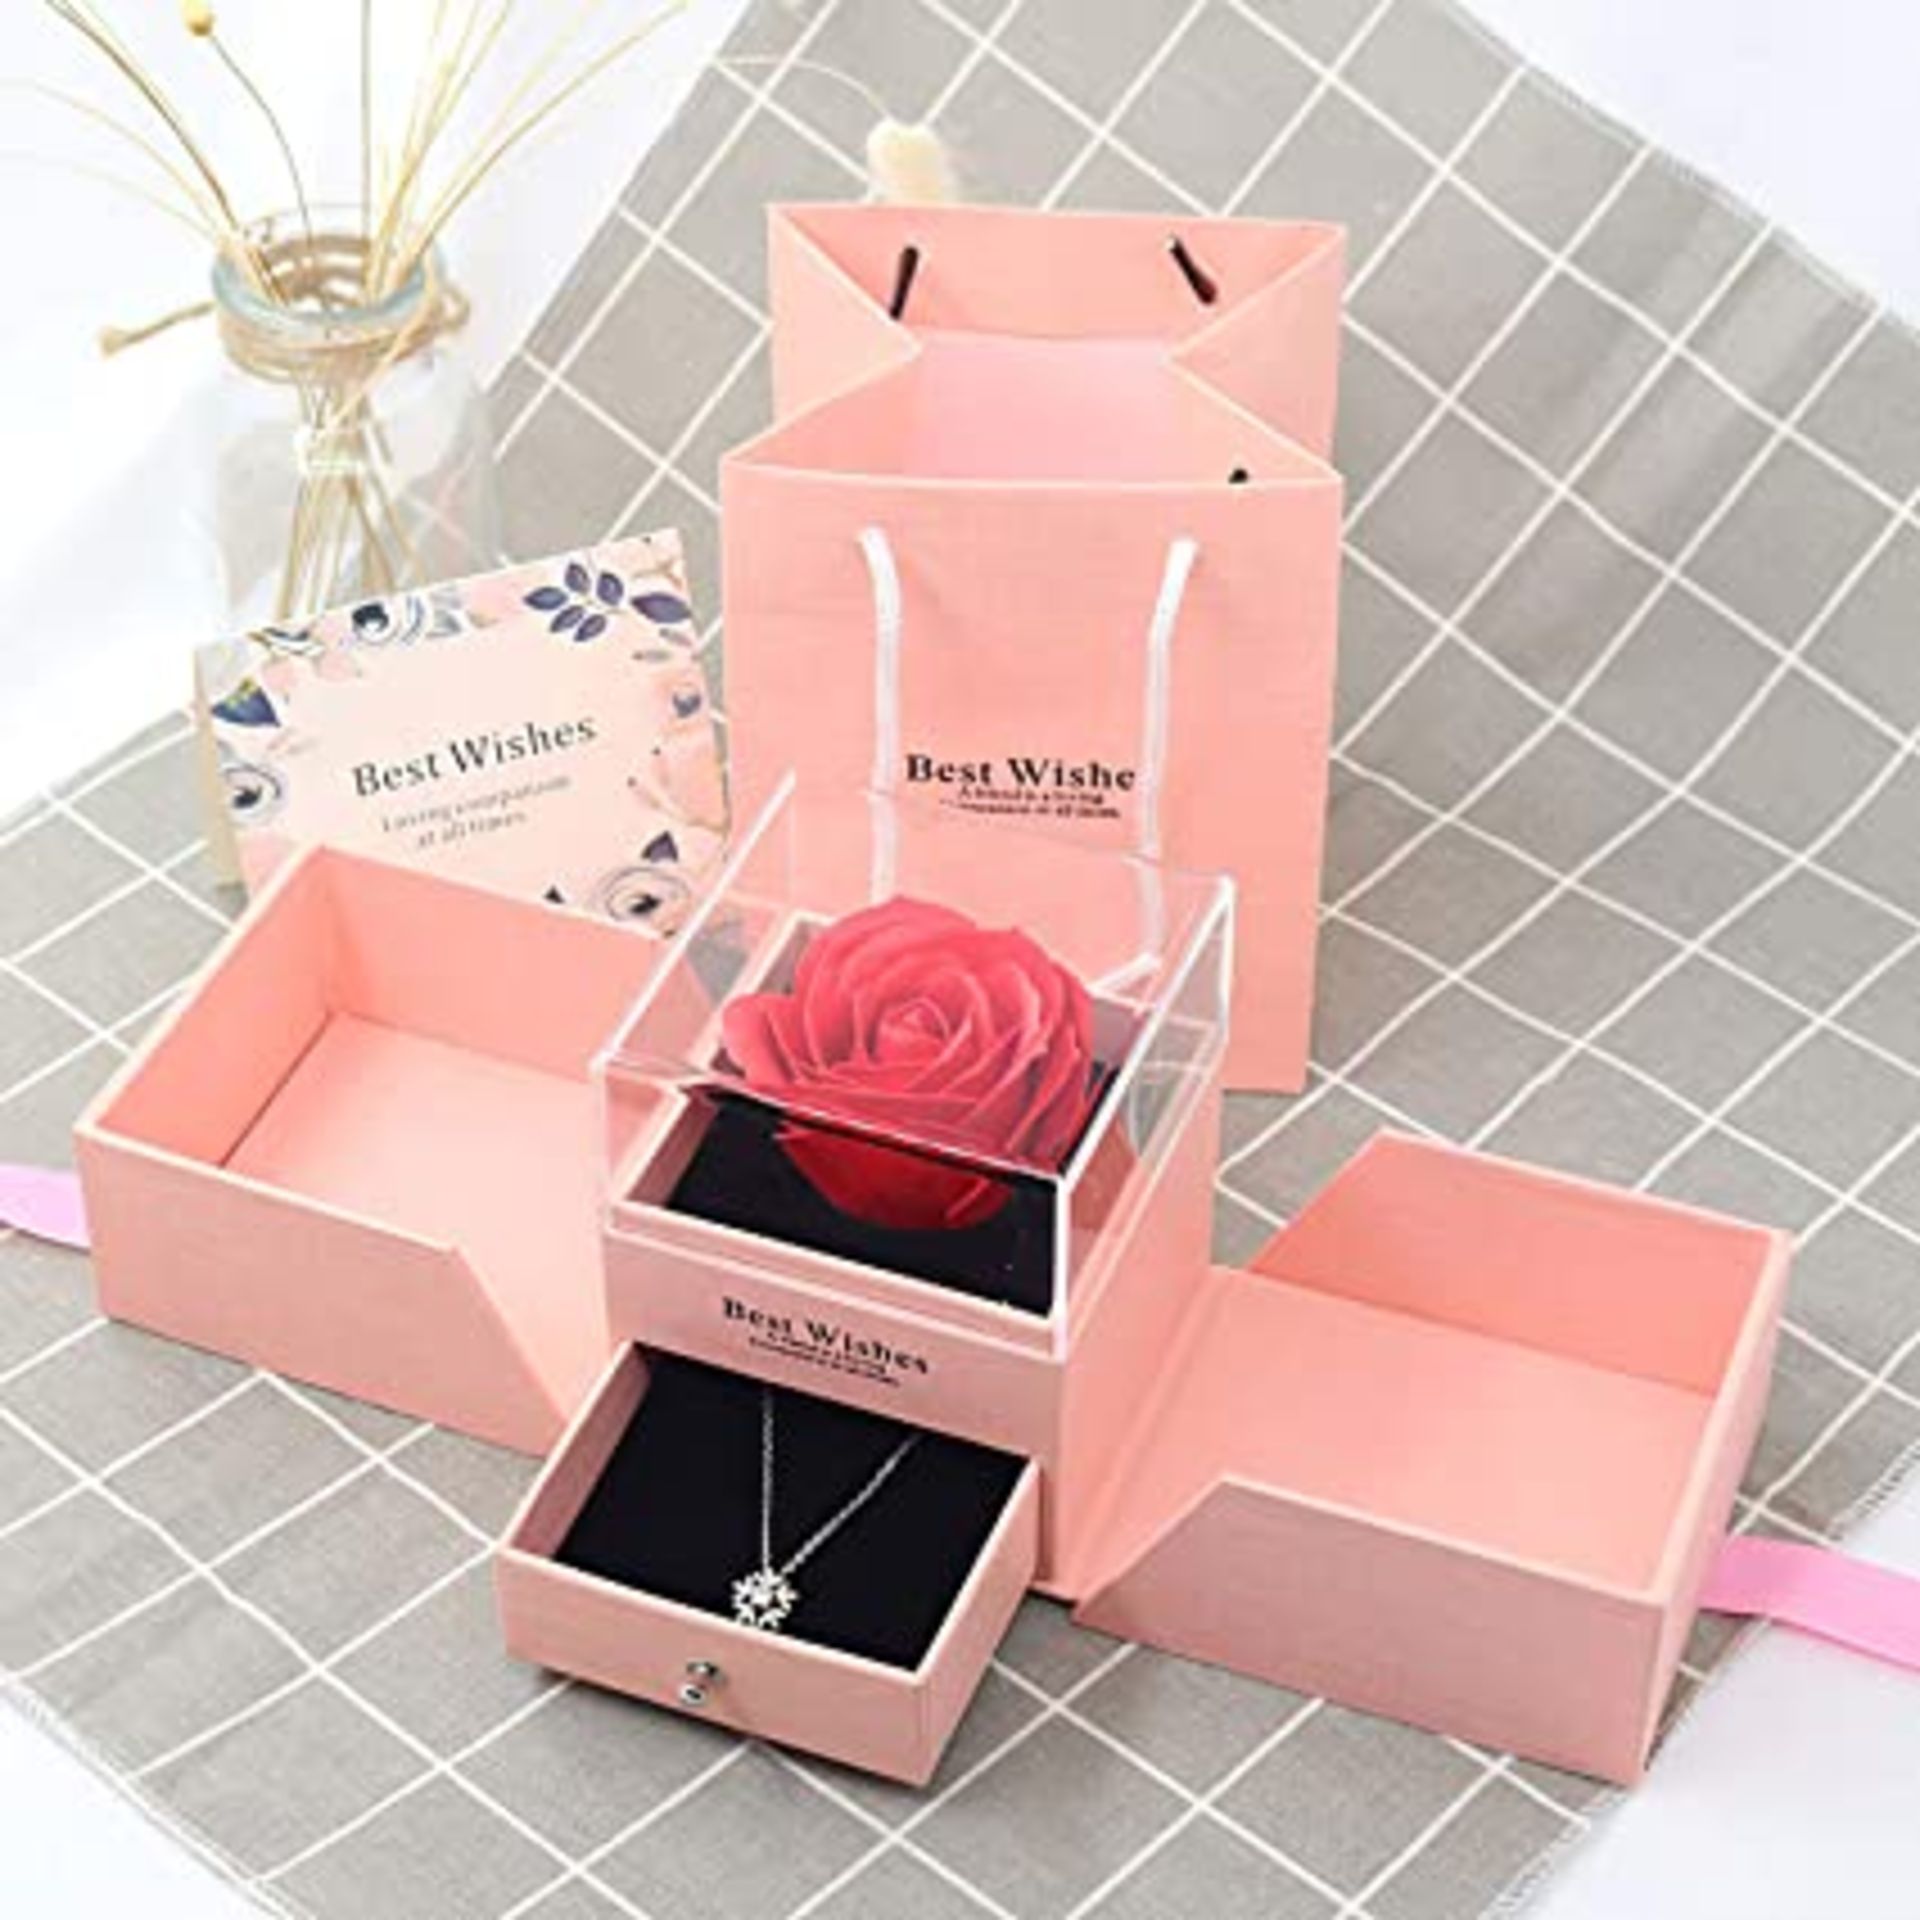 RRP - £15.99 Forever Red Rose Jewelry Gift Box, Jewelry Box with hangbag